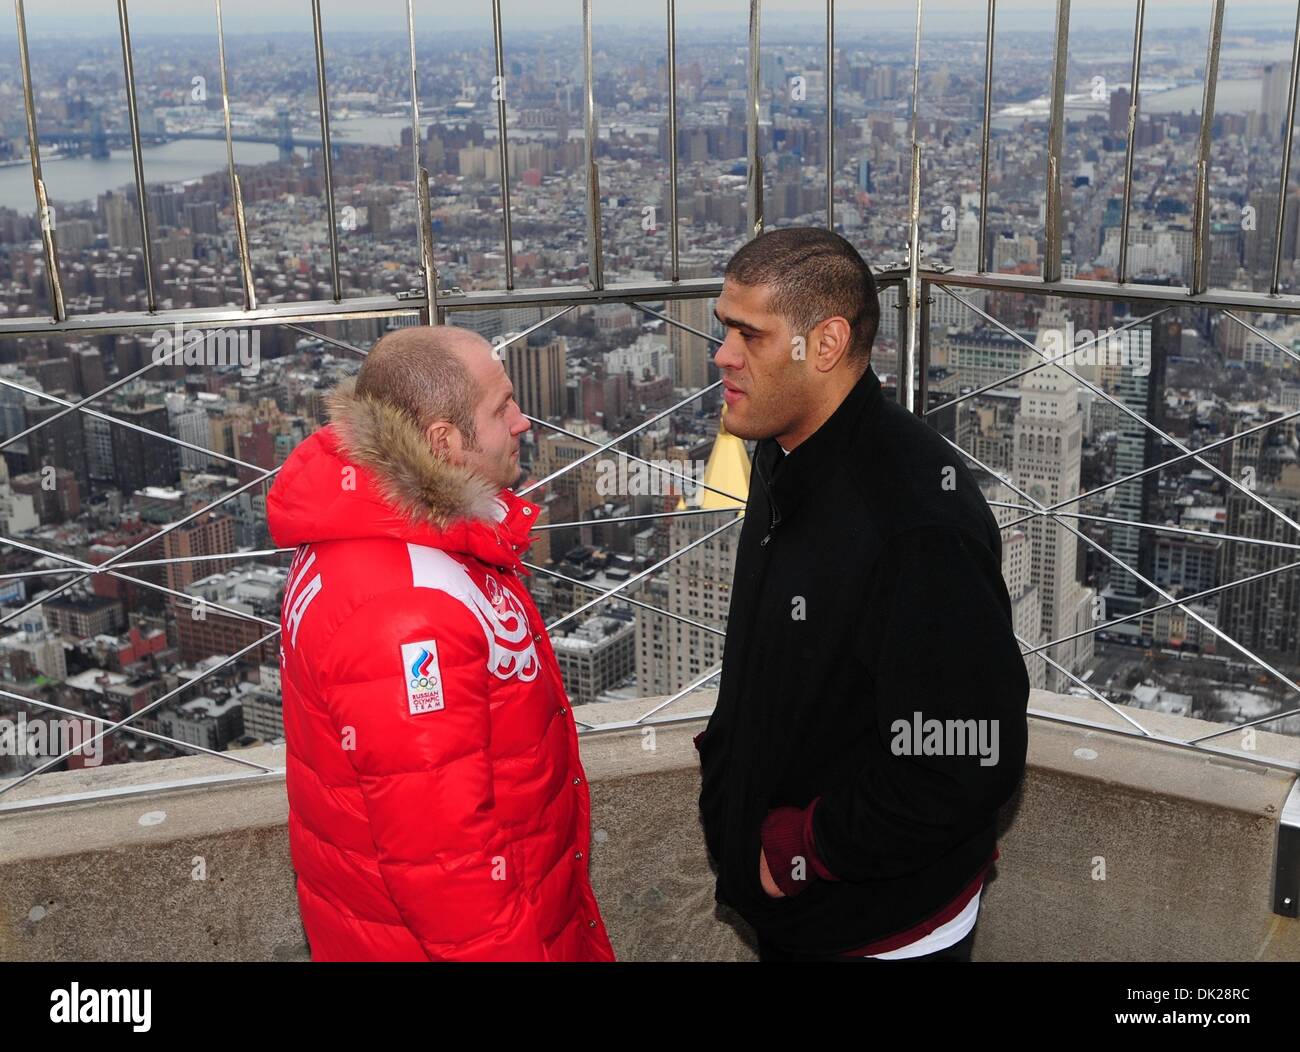 Feb. 9, 2011 - Manhattan, New York, U.S. - Strikeforce Mixed Martial Arts fighters FEDOR EMELIANENKO (L) also known as The Last Emperor and ANTONIO SILVA (R) also known as Bigfoot face off as they visit the Empire State Building's 86th floor observatory ahead of this Saturday's Strikeforce World Grand Prix at the Izod Center. (Credit Image: © Bryan Smith/ZUMAPRESS.com) Stock Photo